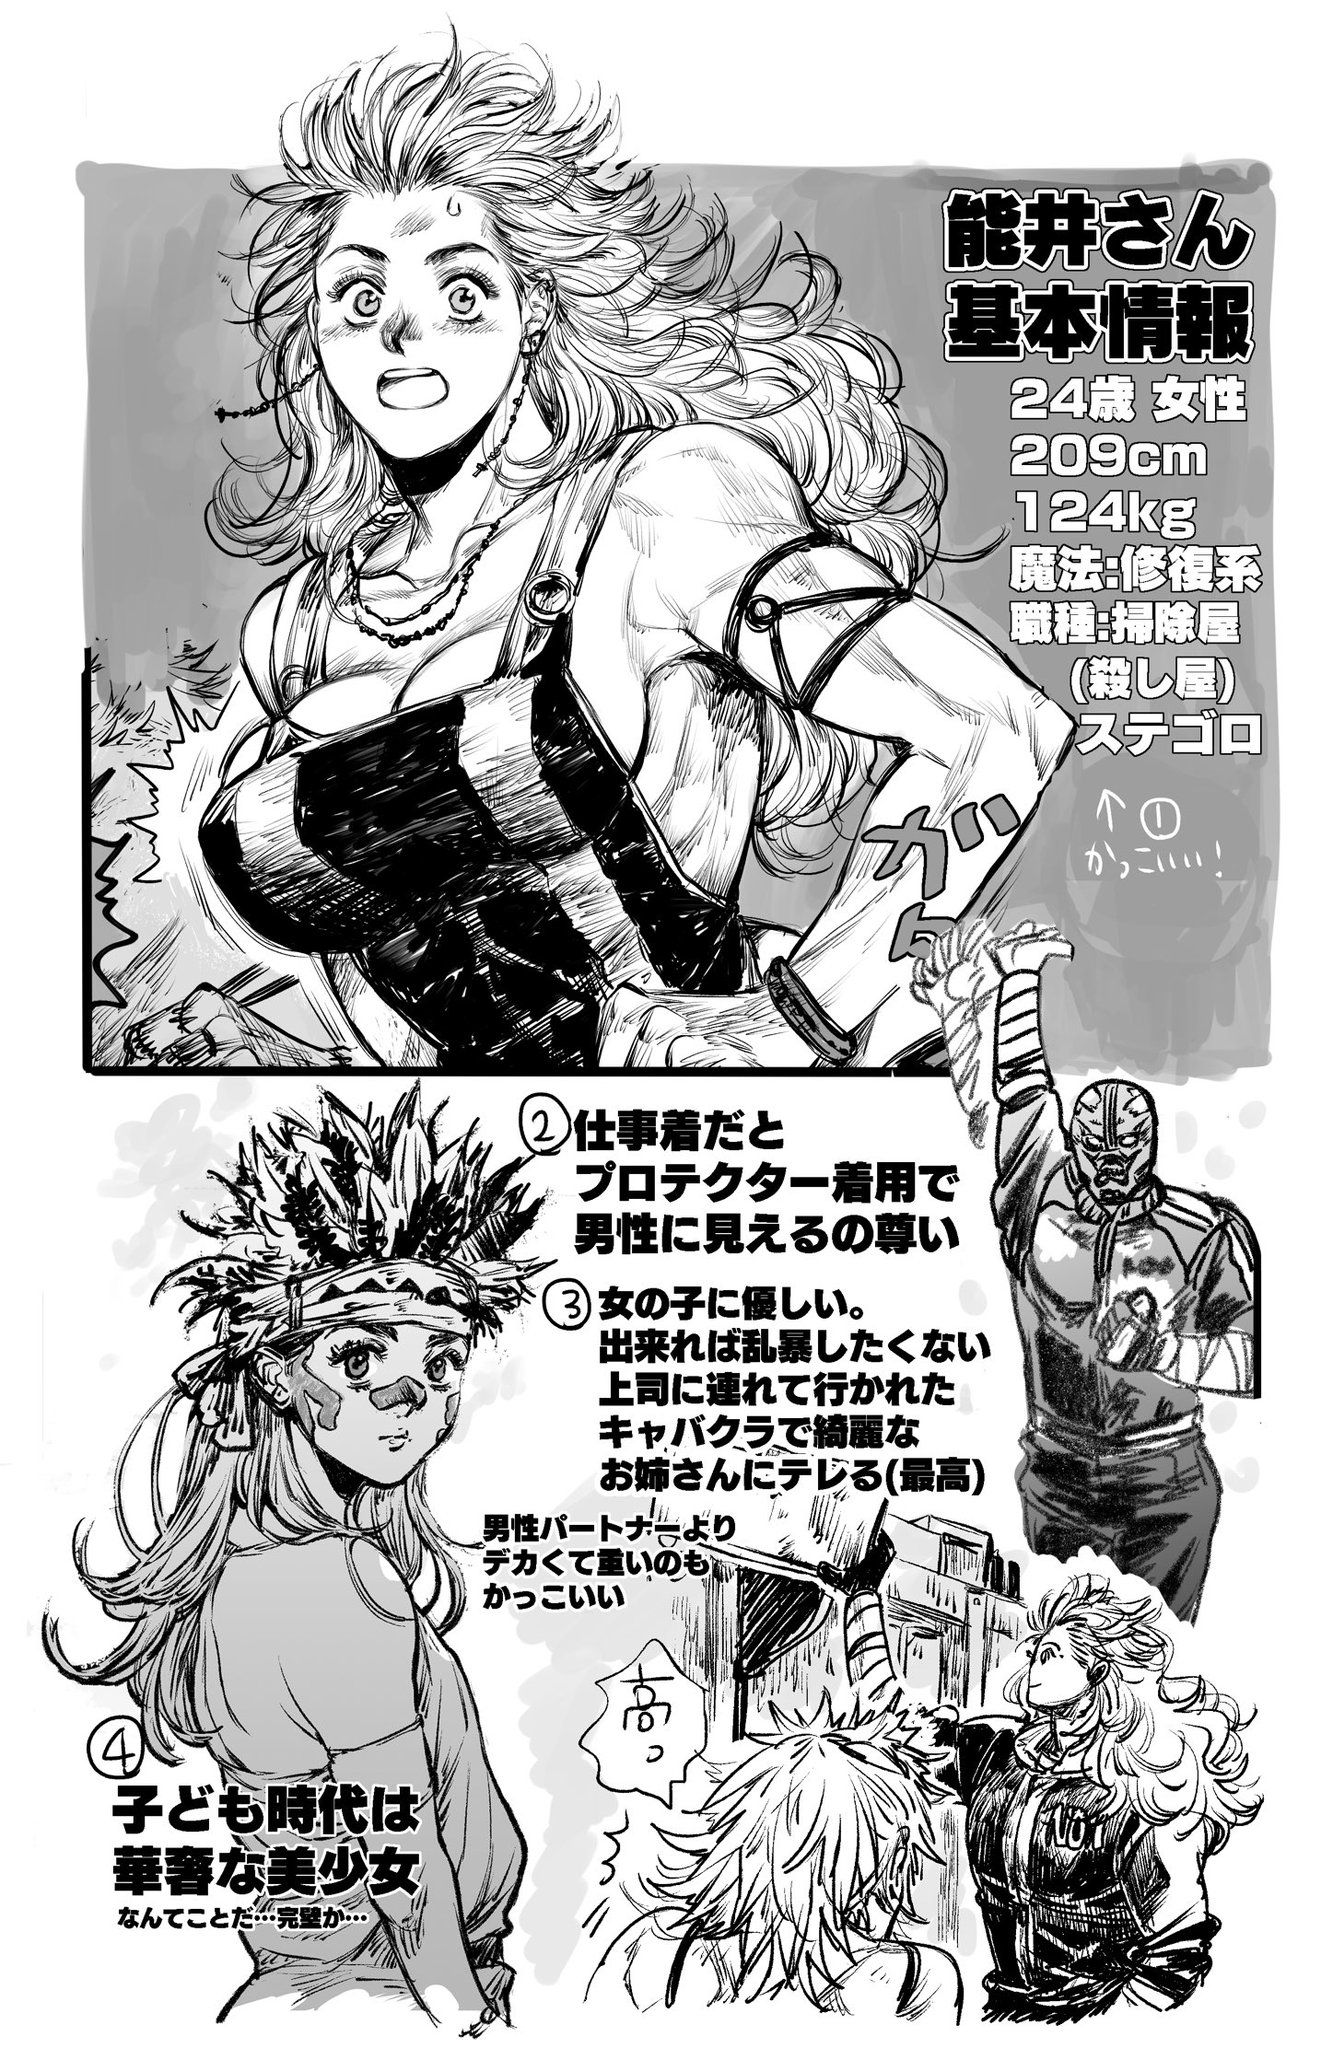 Leona Heidern Hellohotbeef I Mean She Weighs 124 Kg Just Look How Wide Her Back Looks In The 2nd Pic Lol I D Say What The Anime Did Was Keep